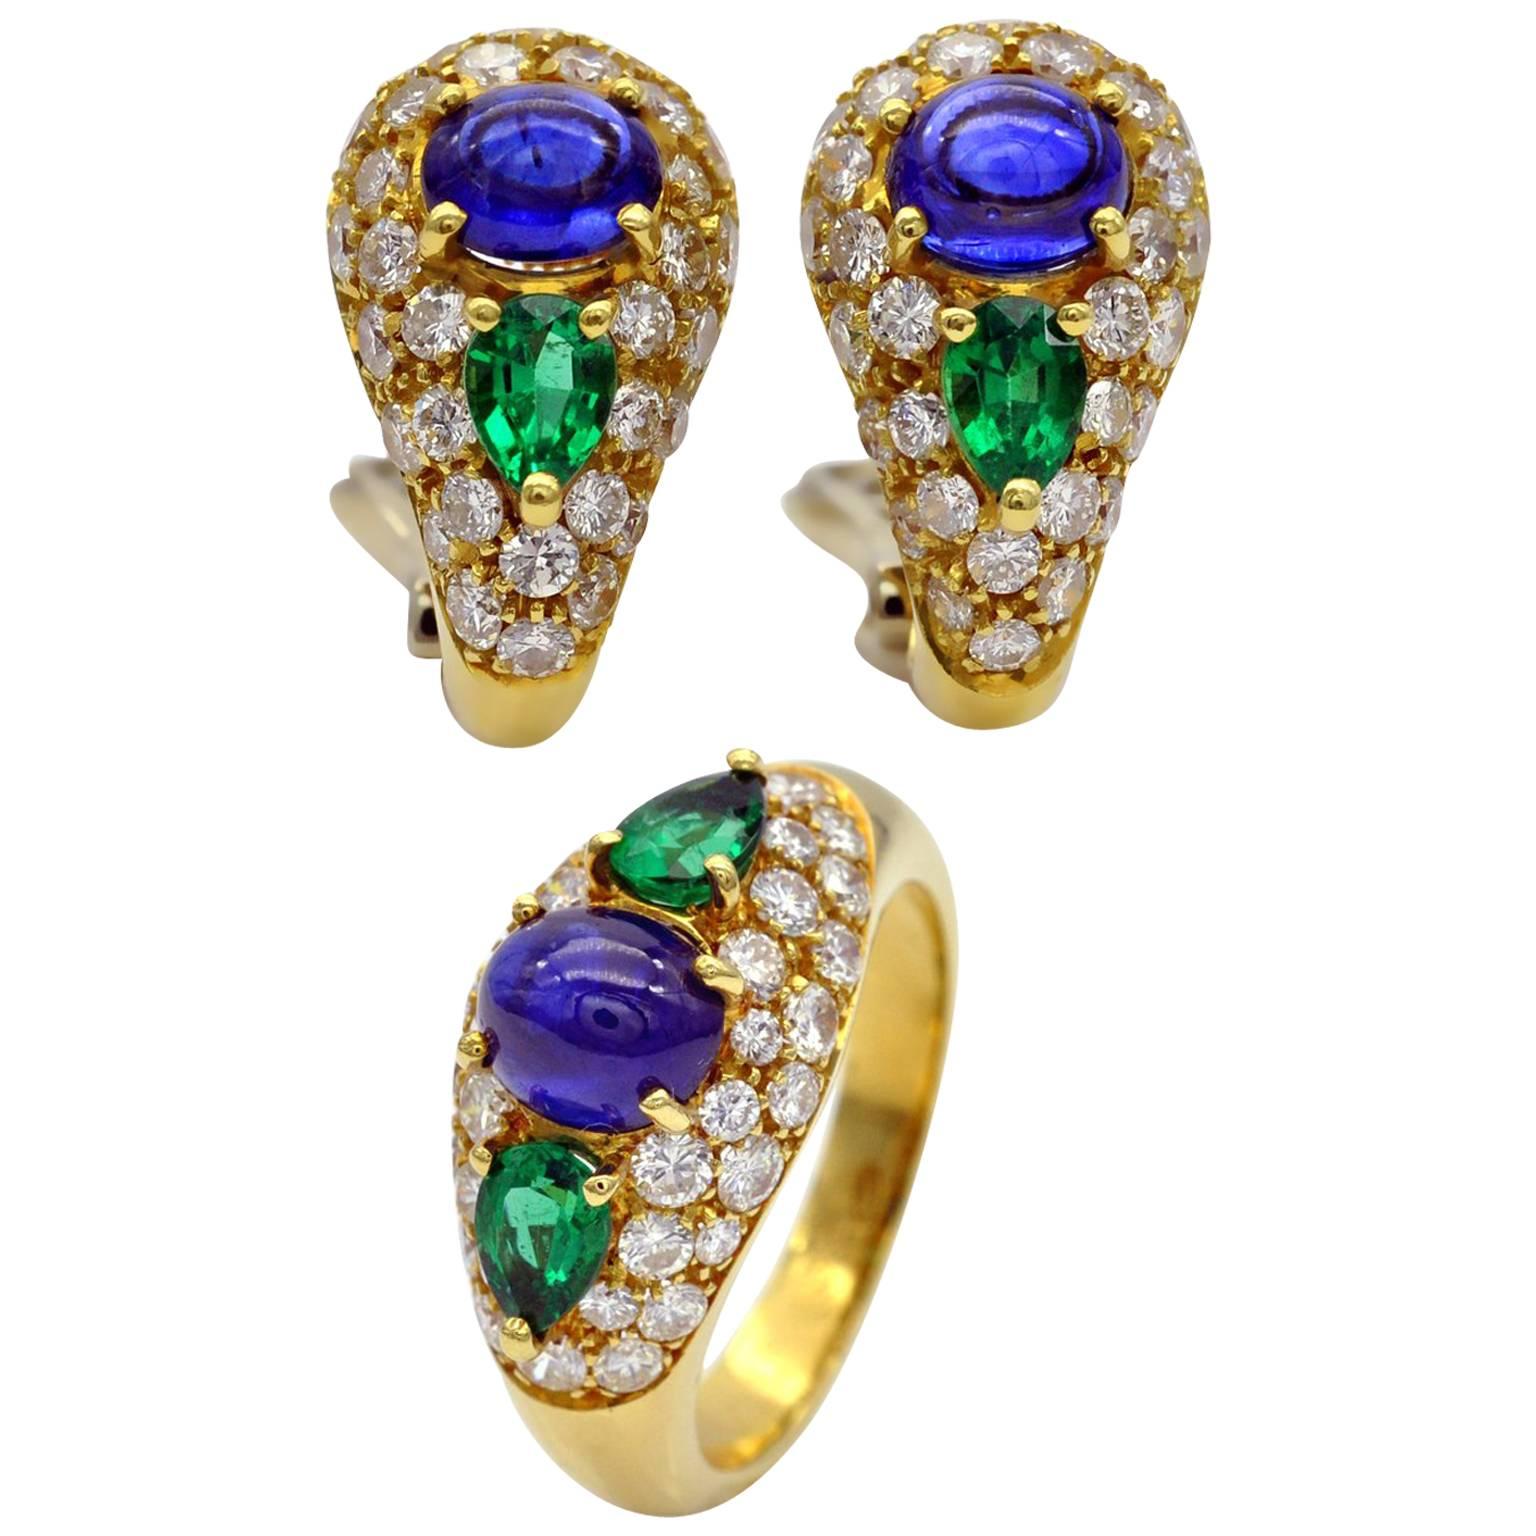 18K Gold Sapphire Emerald and Diamonds Earrings and Ring Set